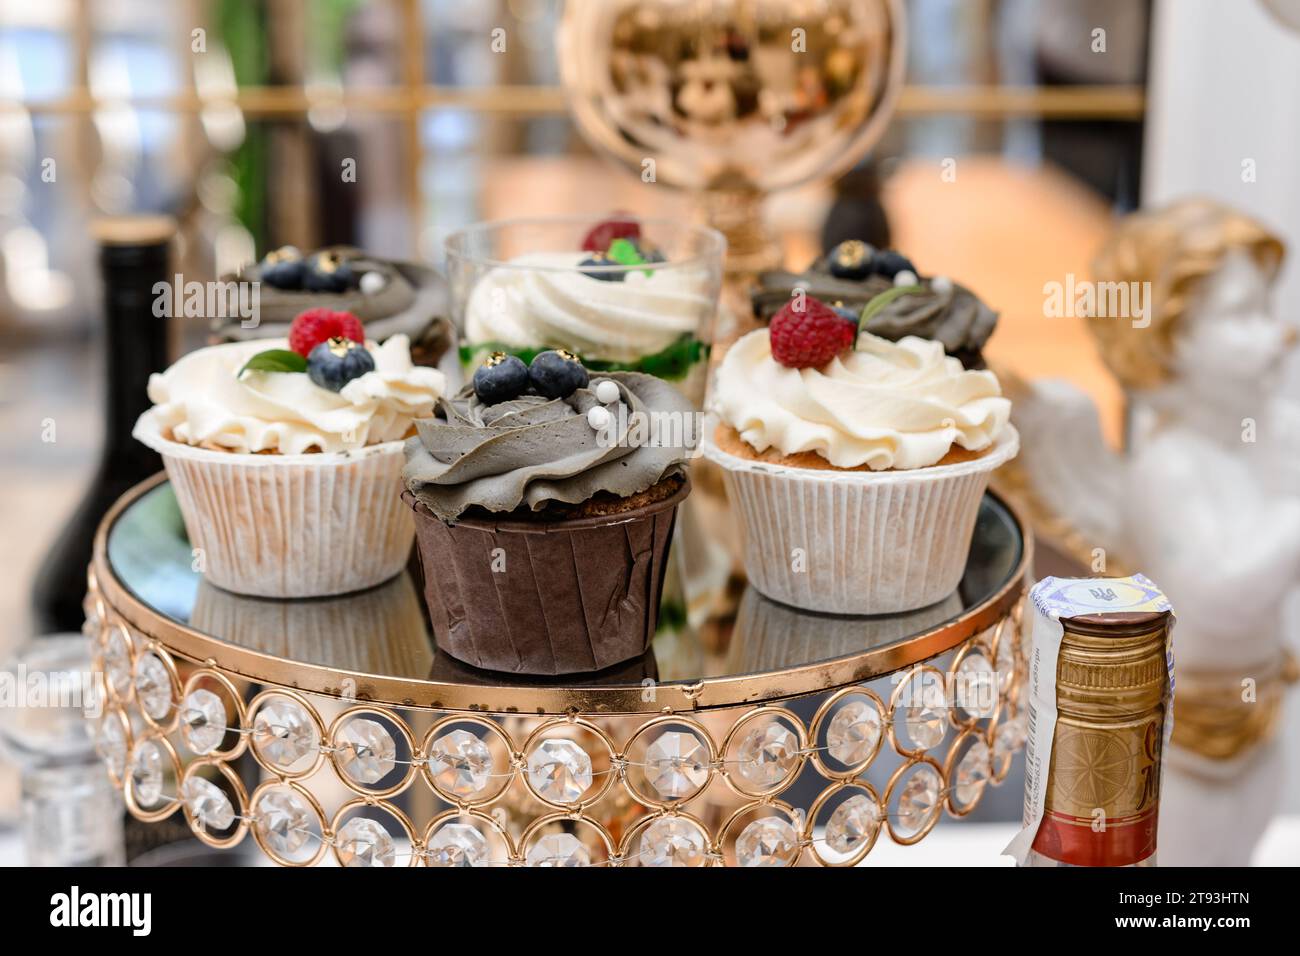 Decoration of a candy bar with various sweets at a festive event, desserts on the table. Stock Photo